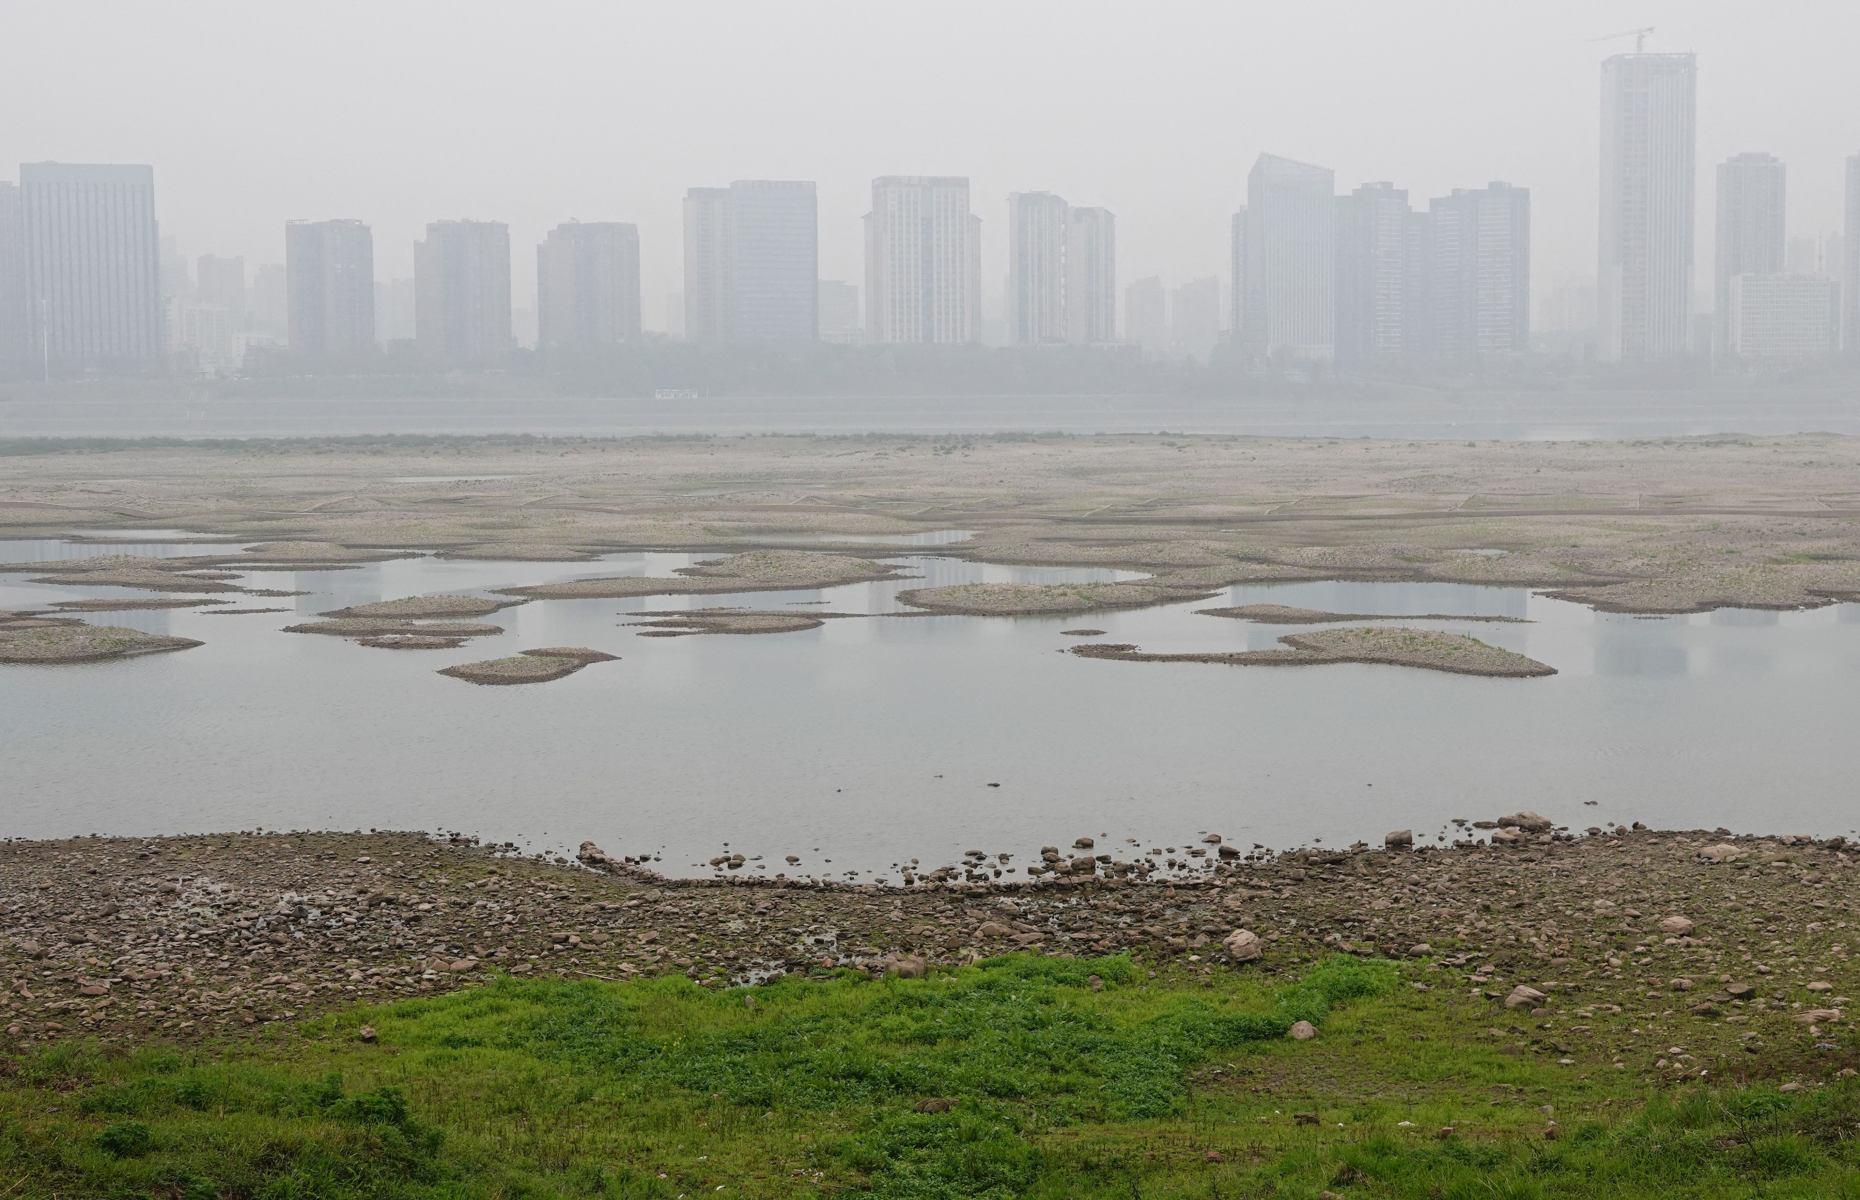 <p>China’s most important river has been bearing the brunt of the climate crisis for years, with fluctuations in its flow resulting in both flooding and water scarcity. Things came to a head in 2022 when China declared a nationwide drought for the first time in nine years, which devastated vital hydropower supplies and dried up the Yangtze. As the river is fed by glaciers in the Himalayas, it is especially vulnerable to global warming: increased glacial melt leads to flooding, while long-term retreat could starve the river of its source. This image shows the Yangtze’s parched riverbed at Yichang in March 2023.</p>